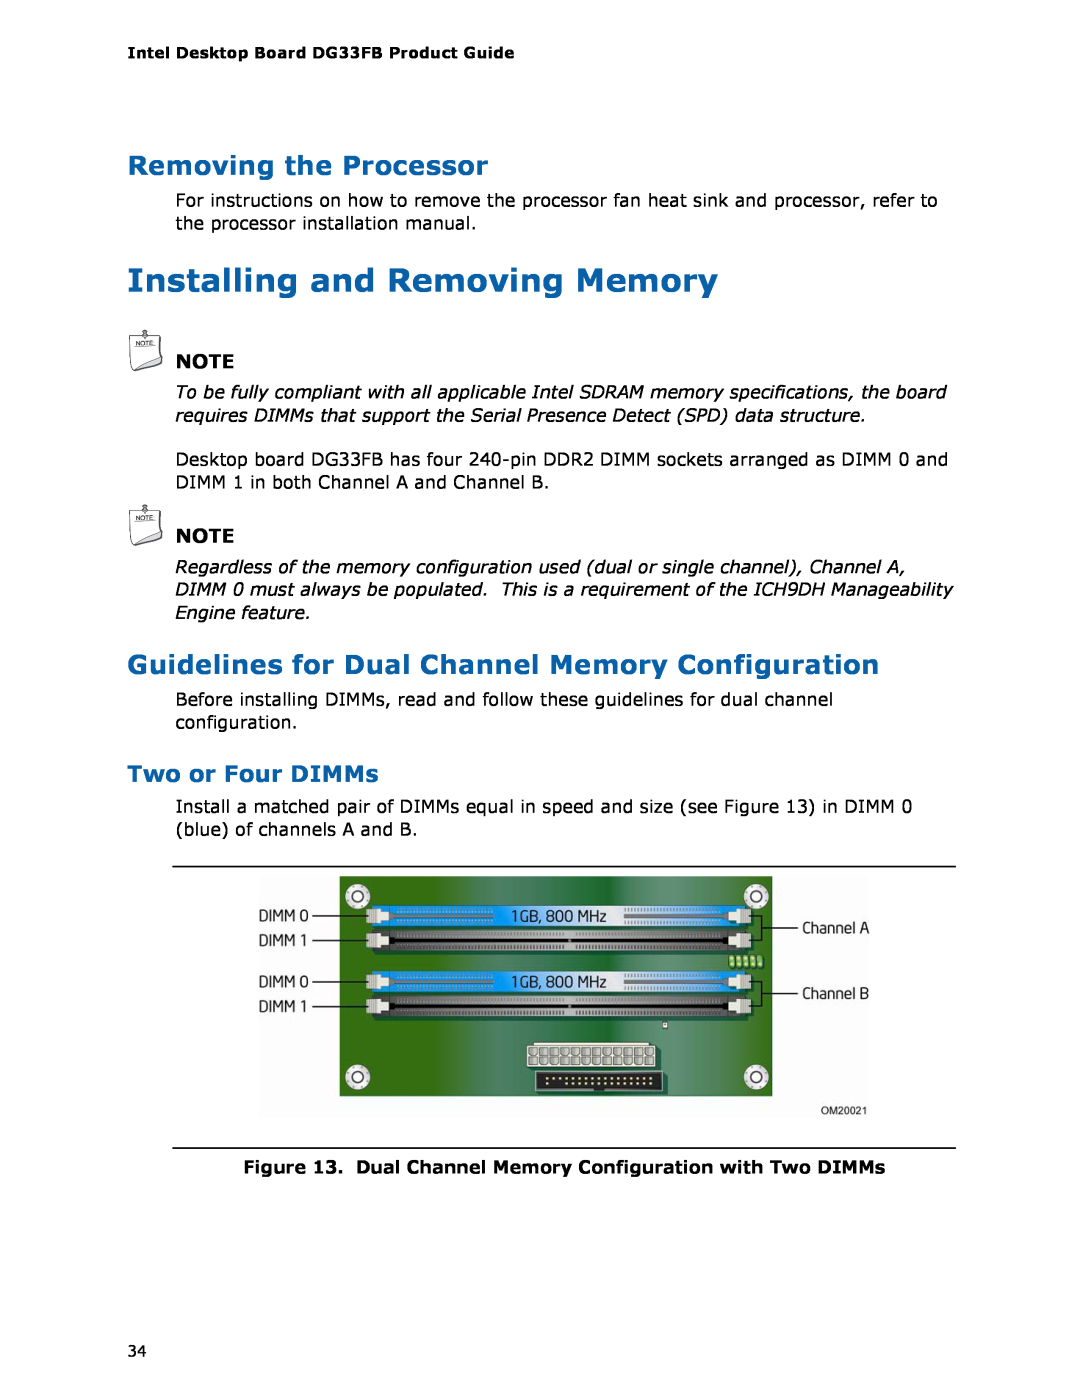 Intel DG33FB Installing and Removing Memory, Removing the Processor, Guidelines for Dual Channel Memory Configuration 